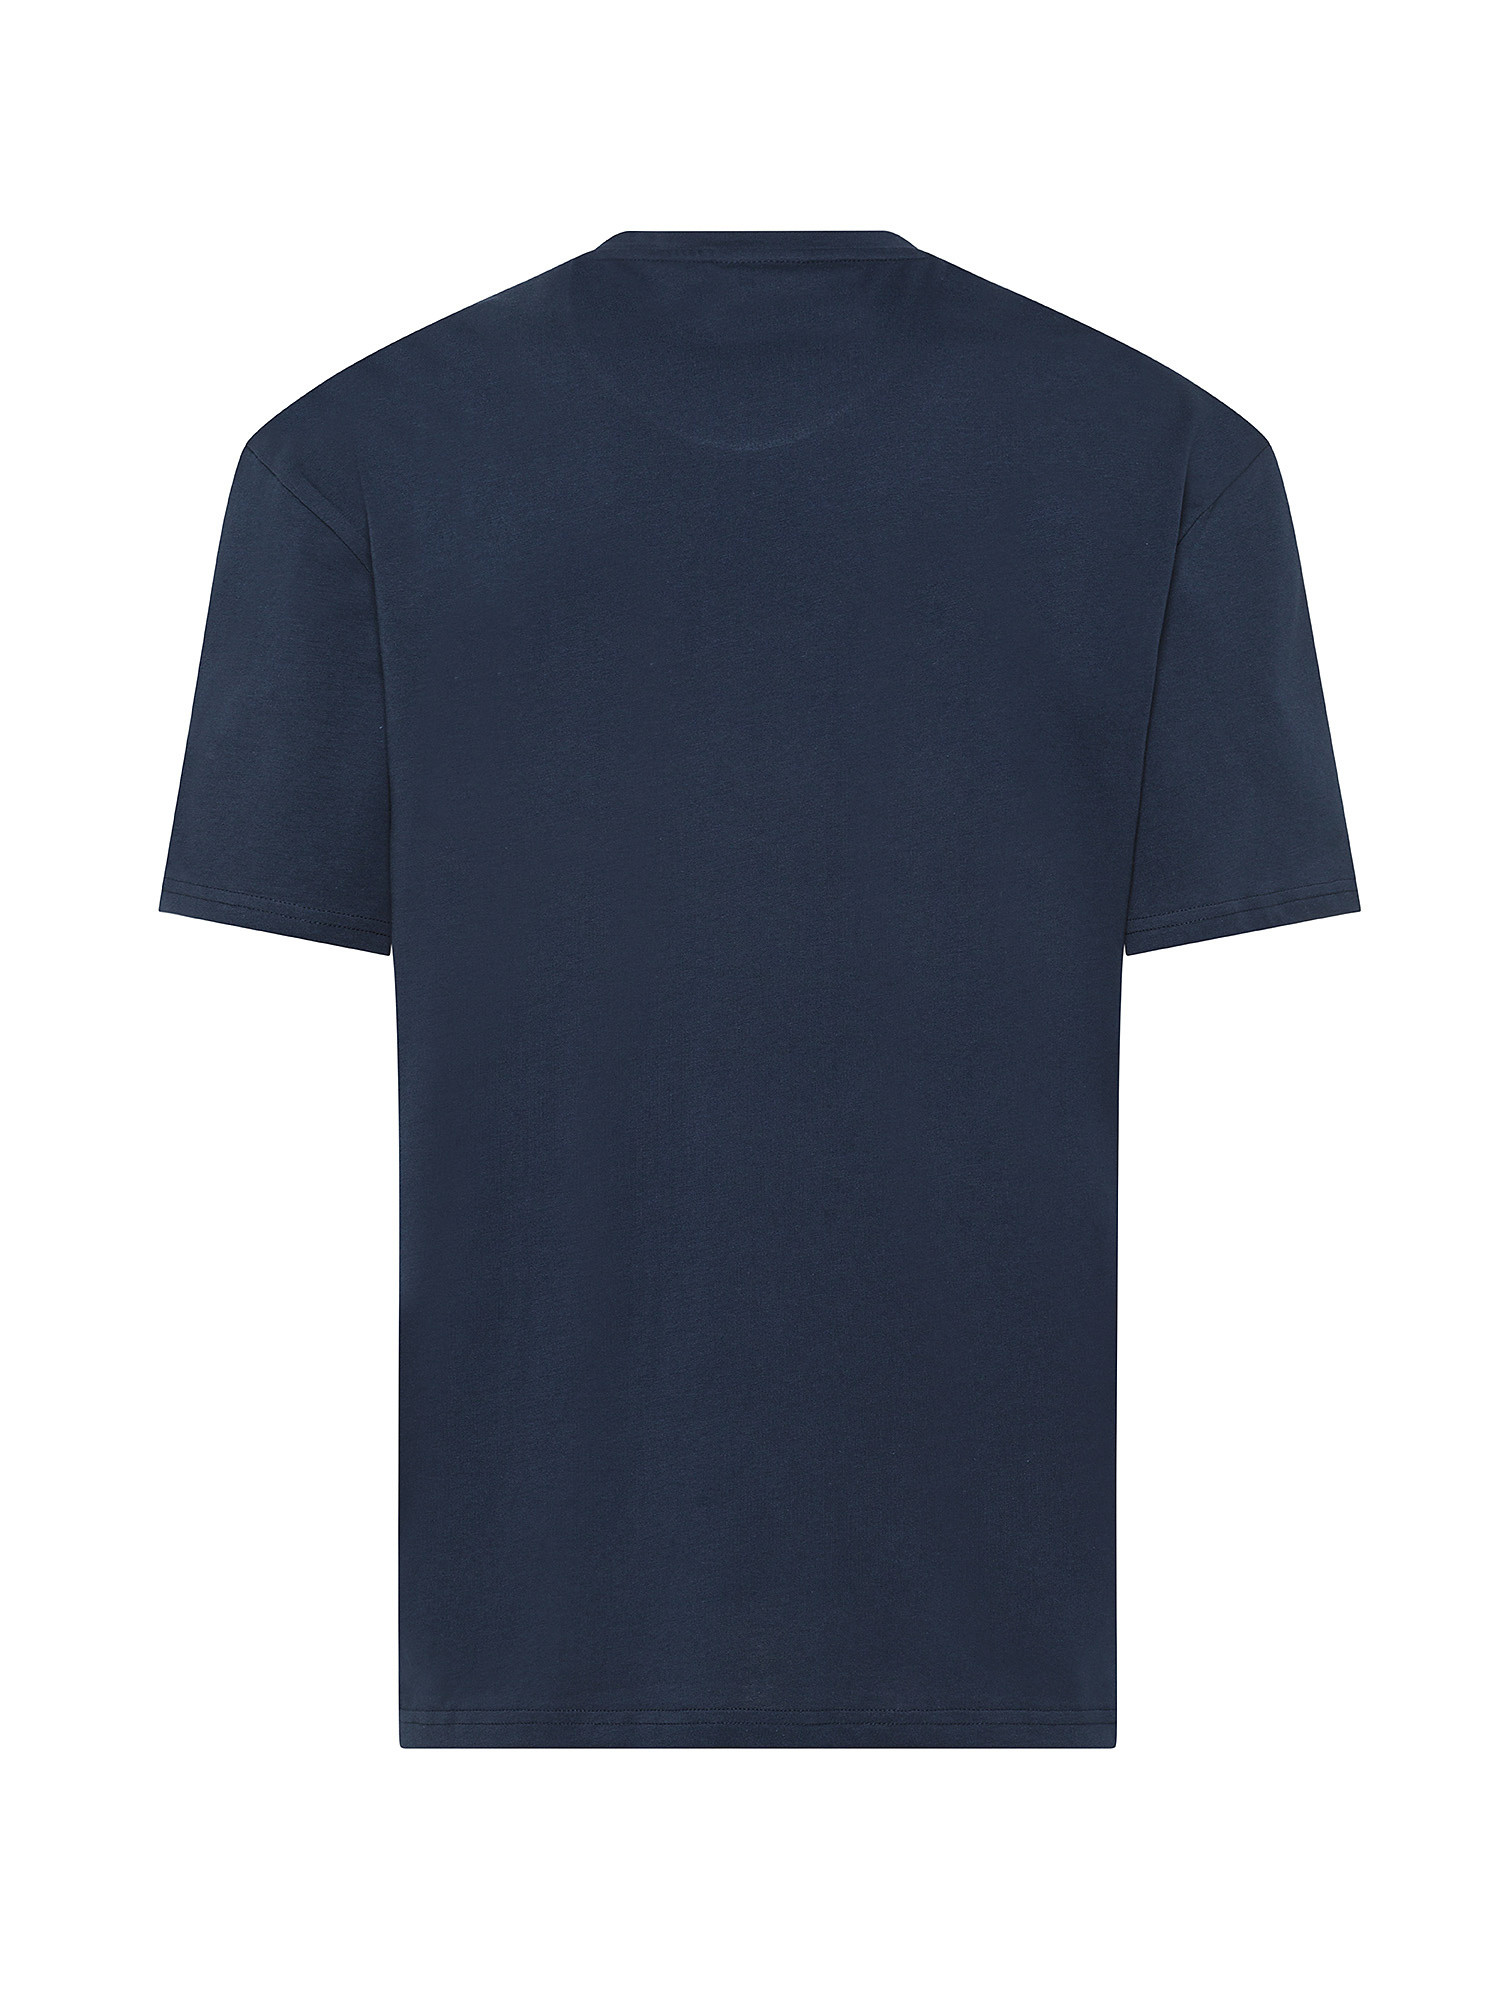 Hugo - T-shirt con stampa logo in cotone, Blu scuro, large image number 1